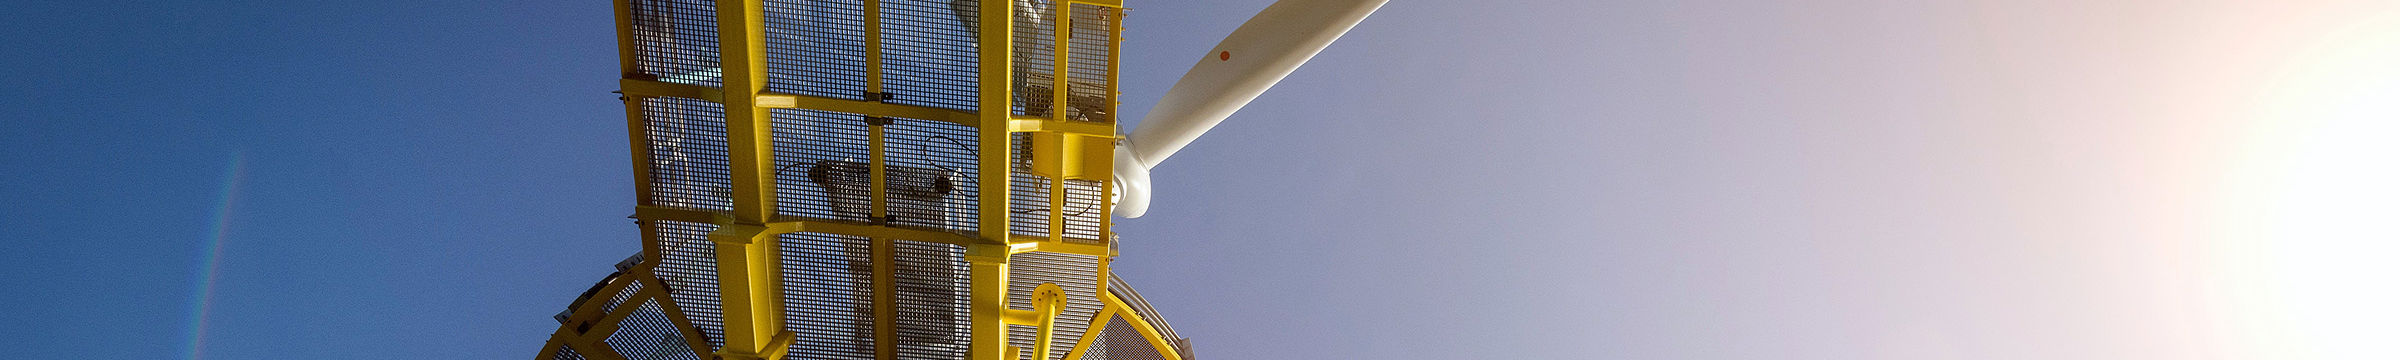 Close-up of the top of the wind turbine